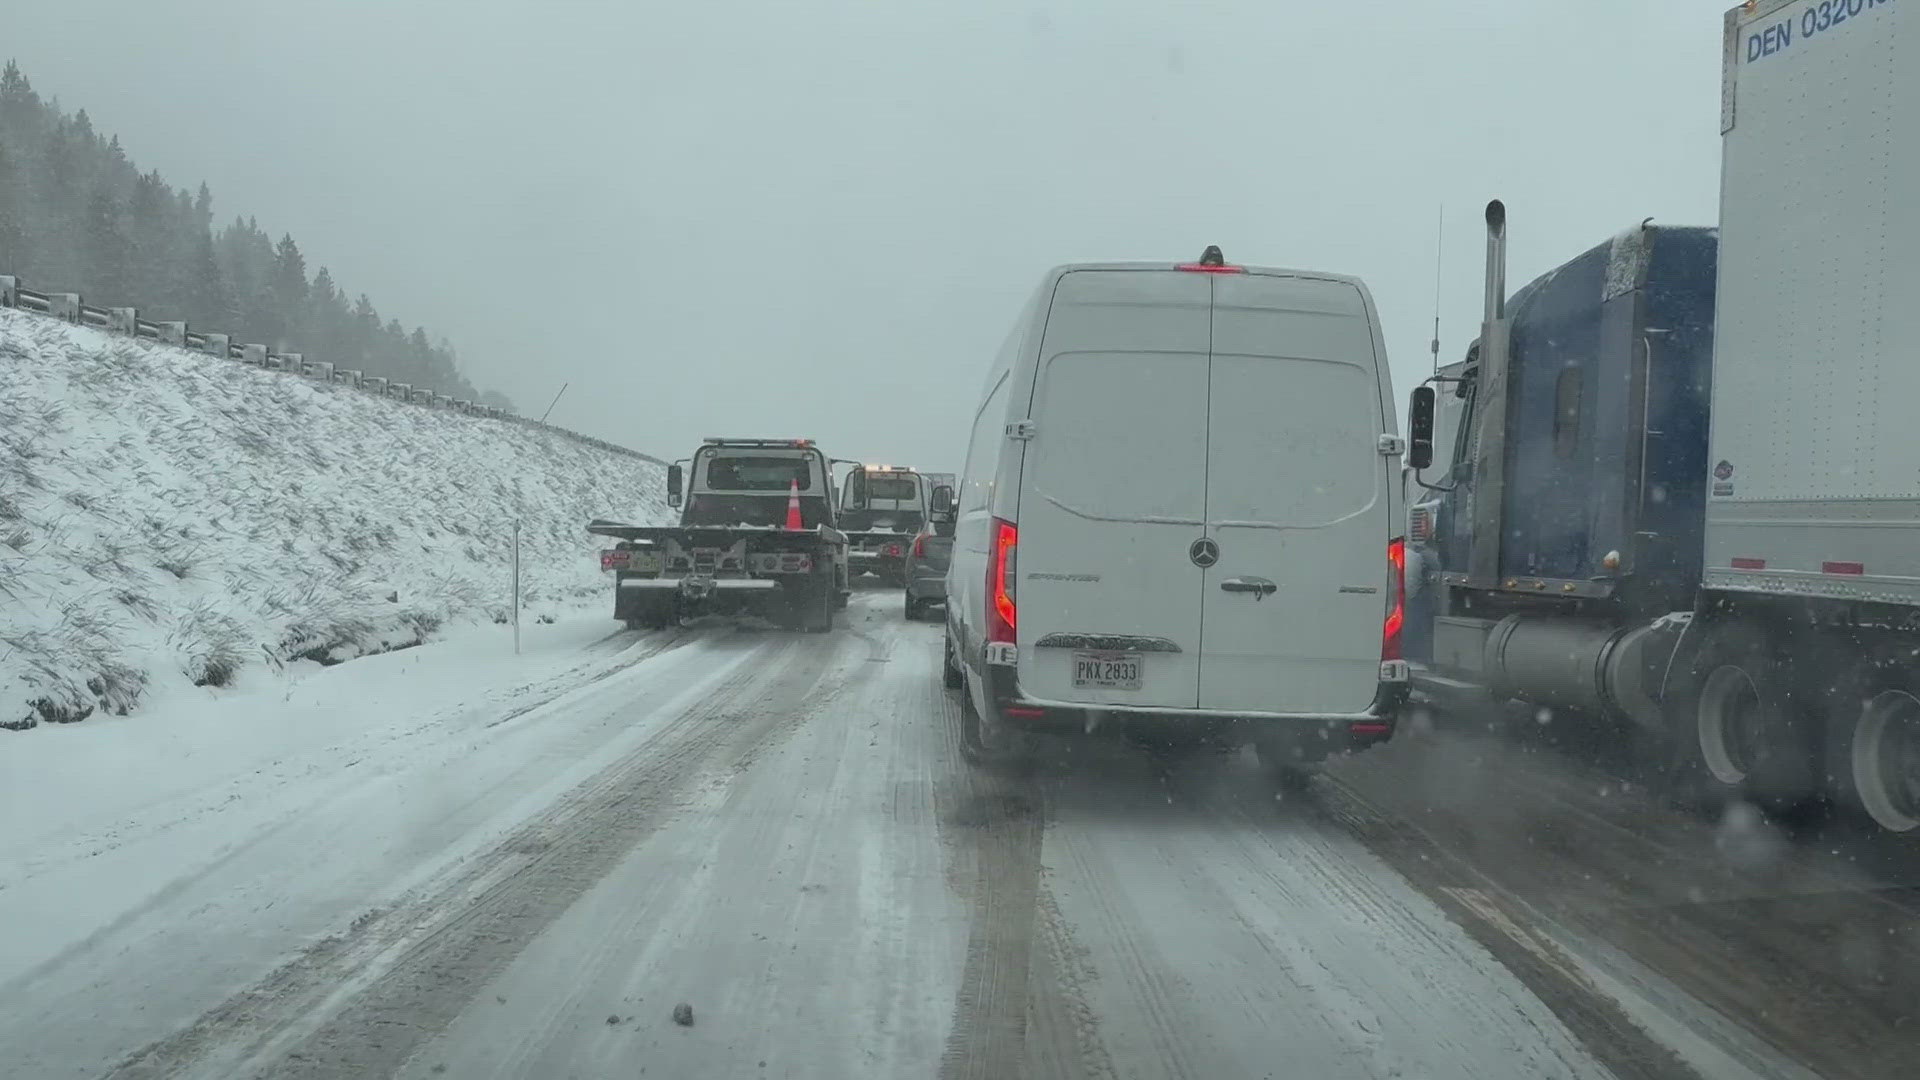 Driving conditions are worsening along I-70 in Colorado's High Country on Tuesday as a fresh round of snow hits the area.